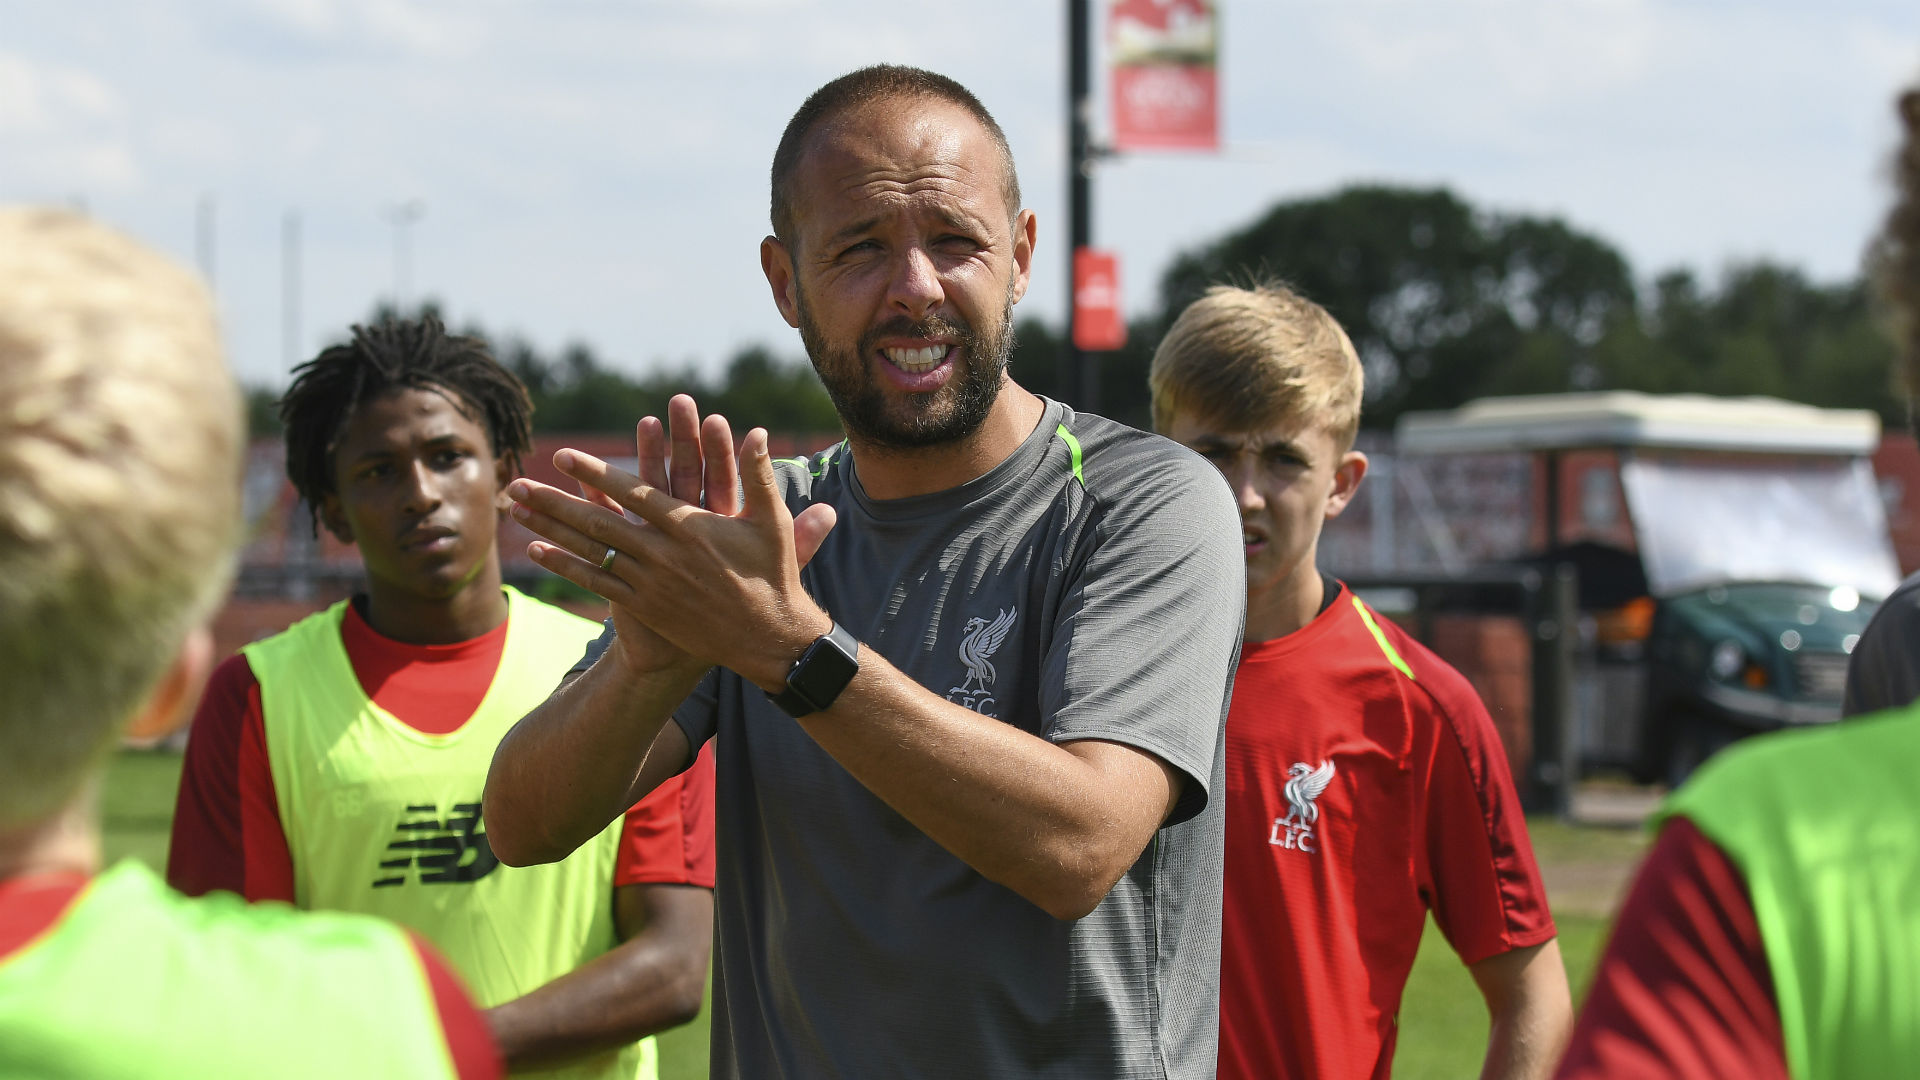 FA Youth Cup final: The fitting finale - Liverpool under-18s coach Lewtas relishing ...1920 x 1080